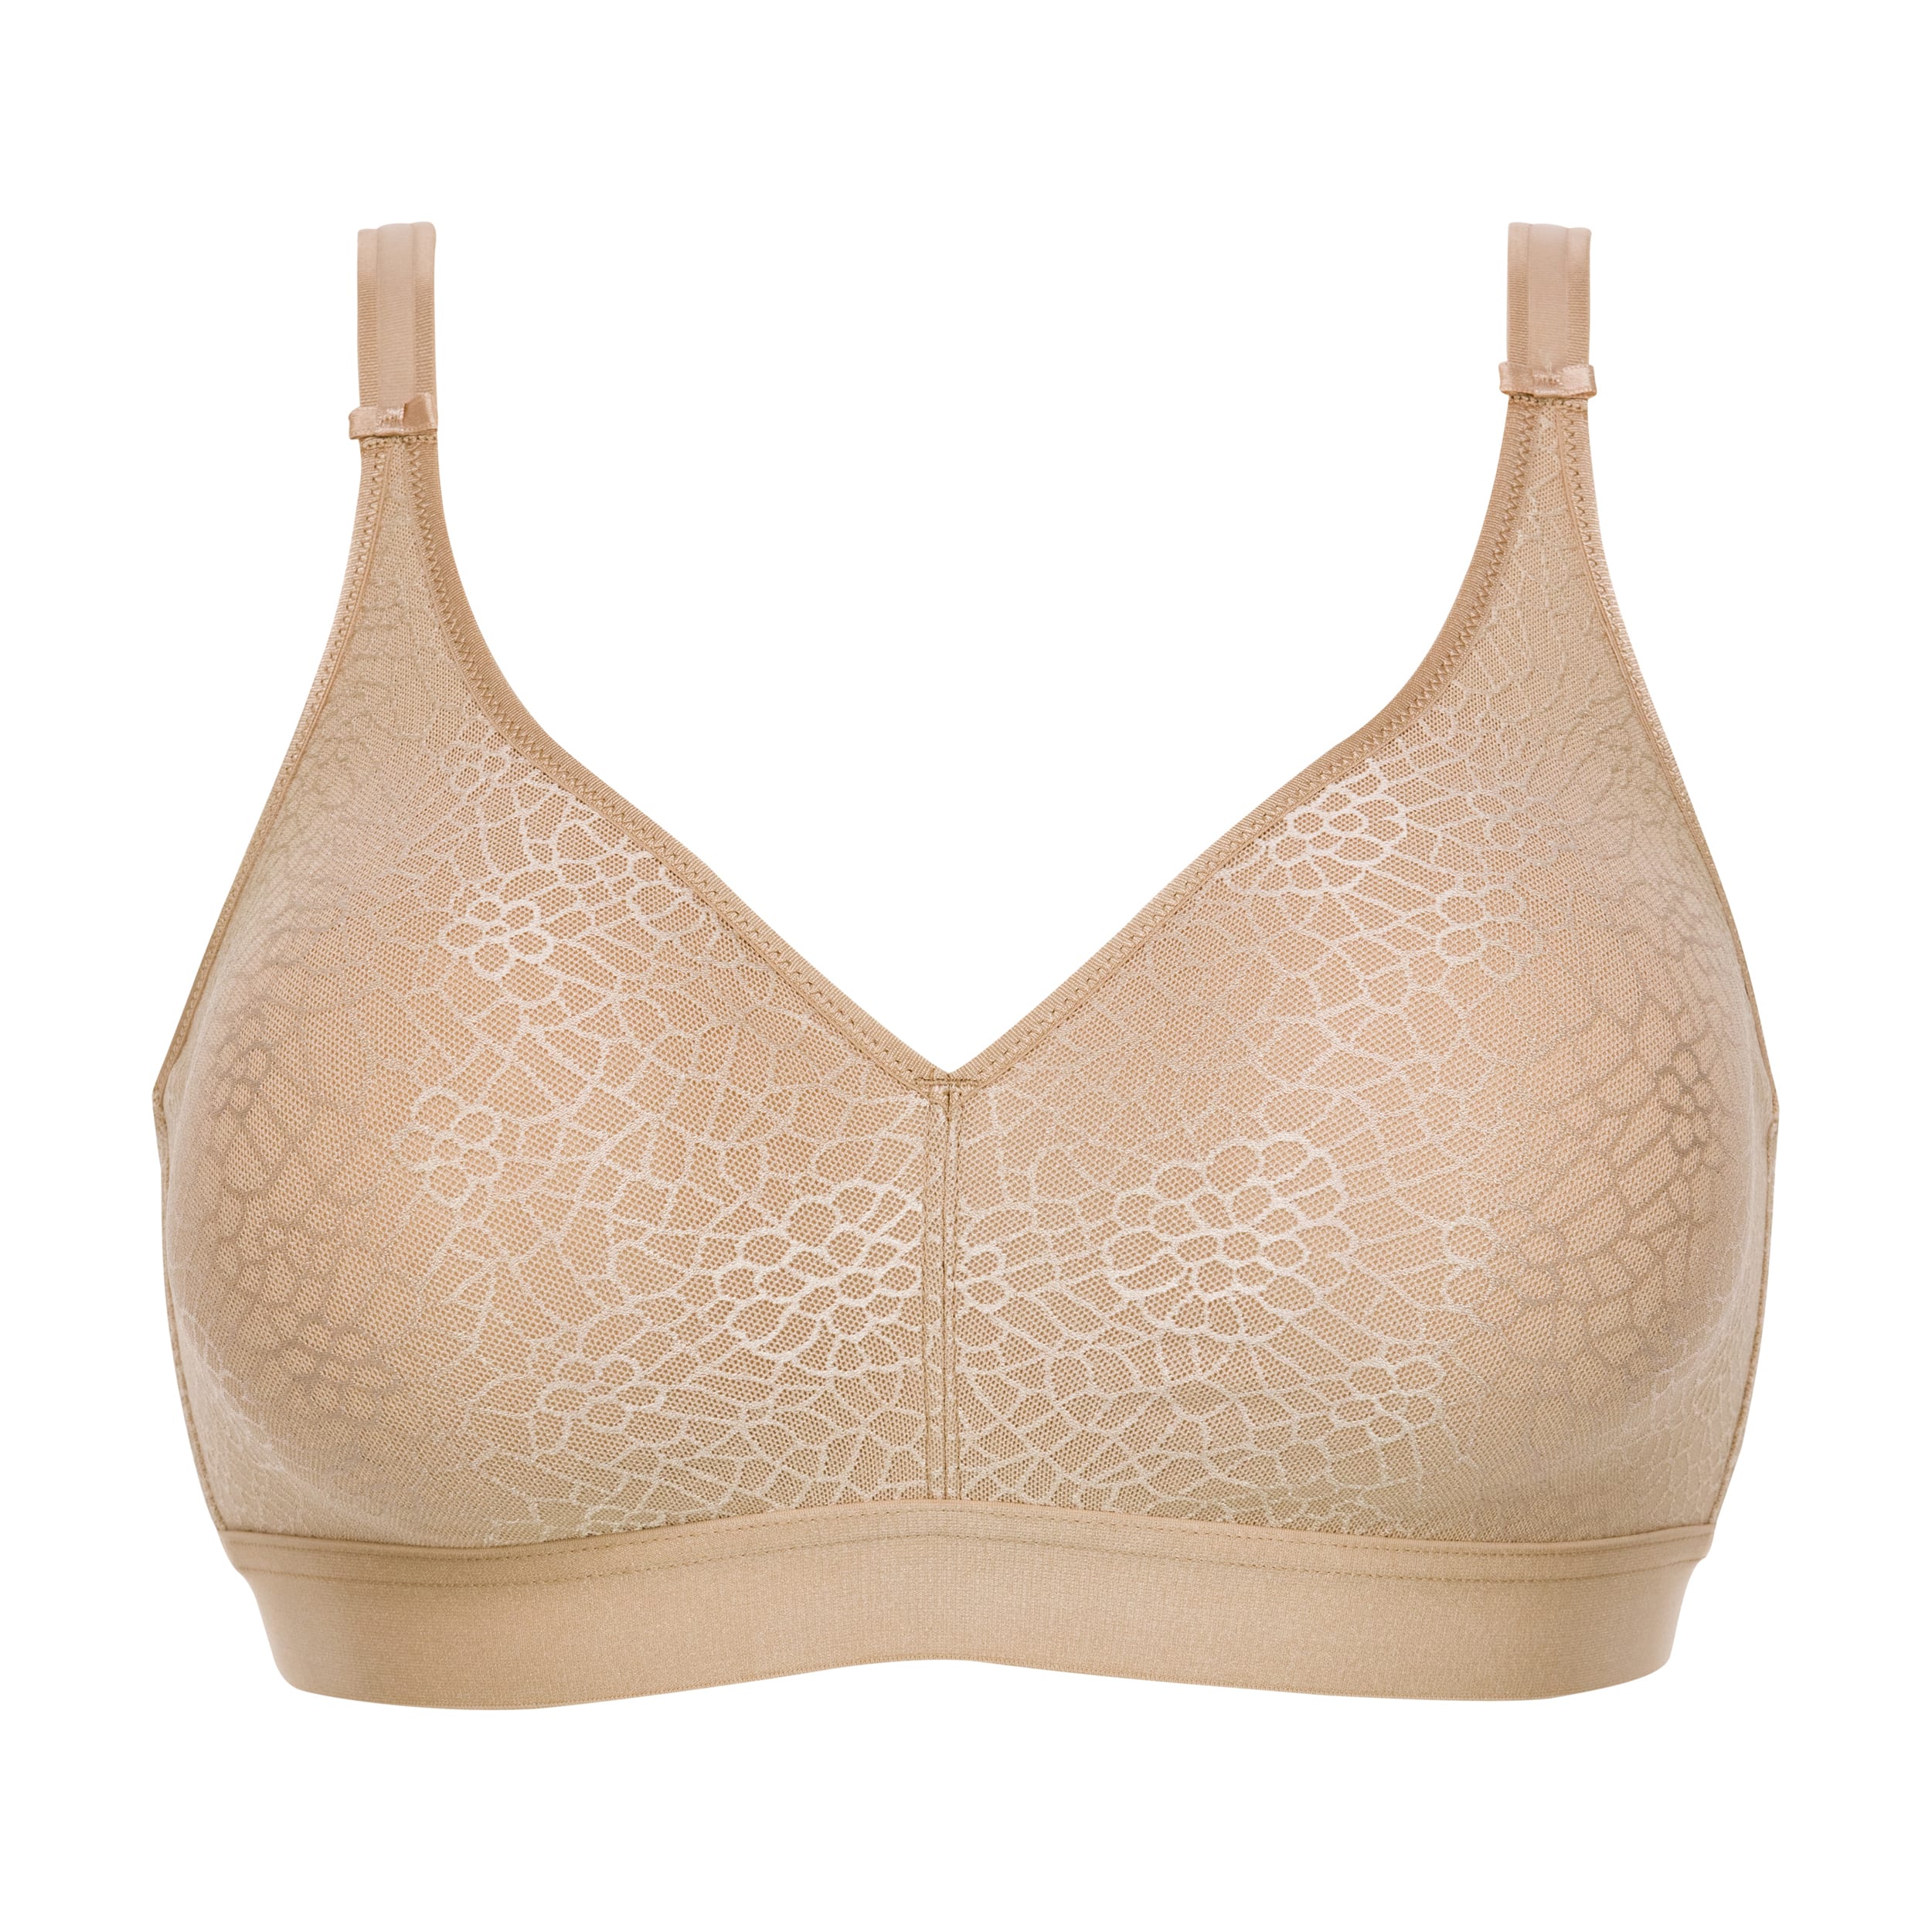 NWOT Chantelle Strapless Bra 32D Underwire Padded Cup Nude Side